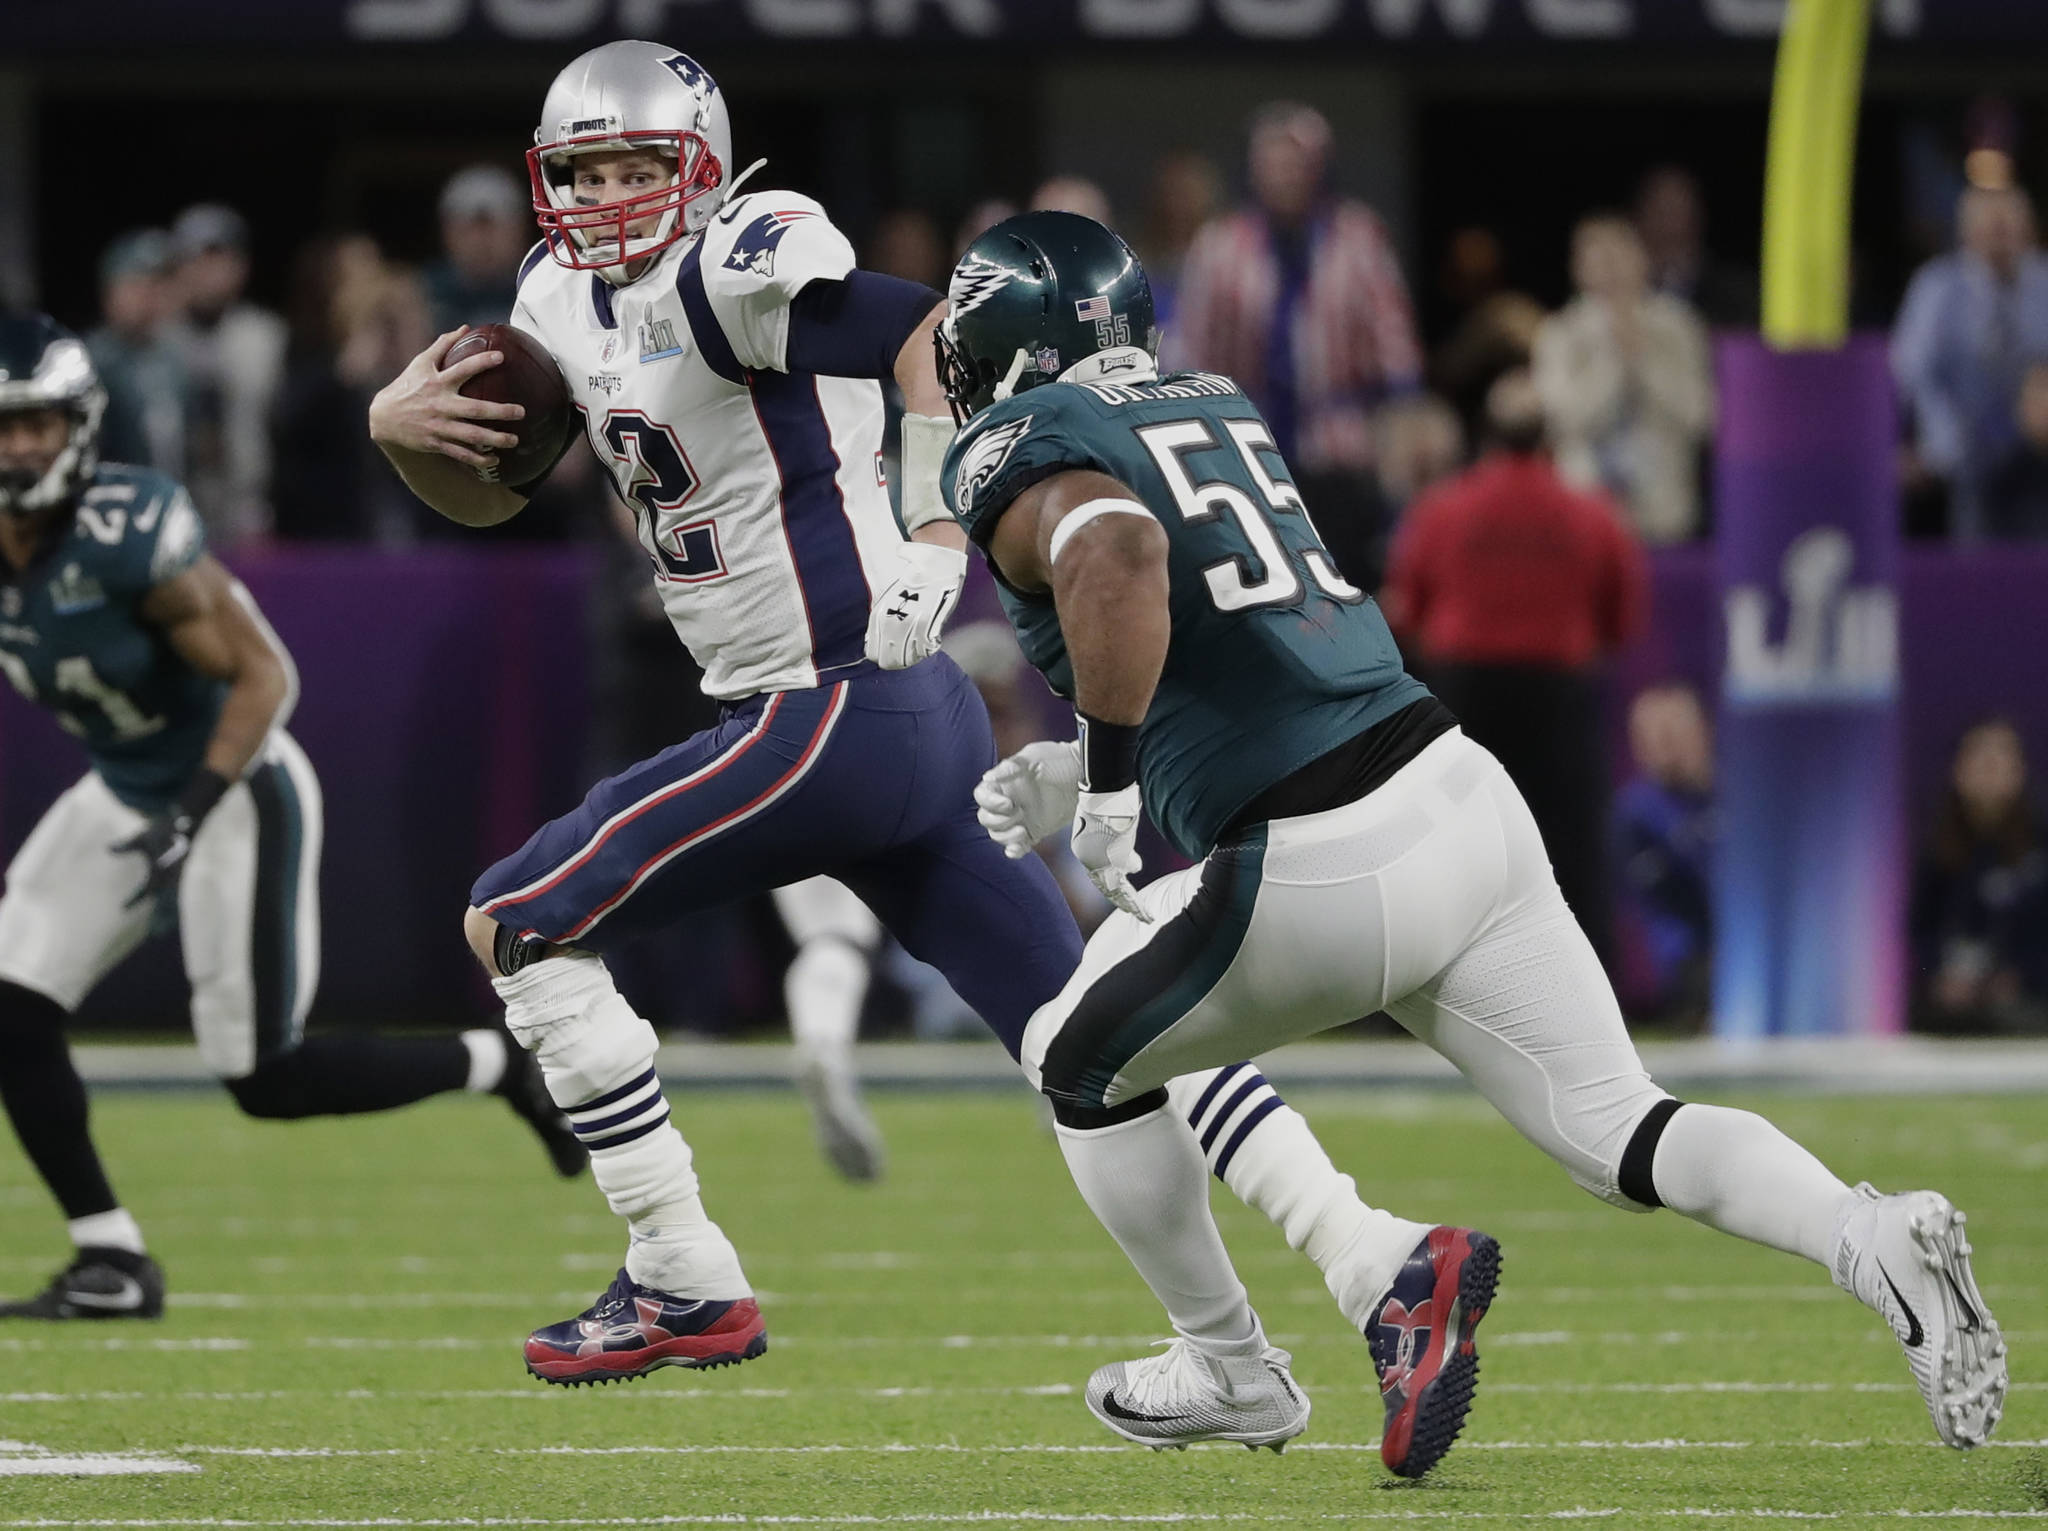 Aggressive playcalling helps Eagles capture first Super Bowl